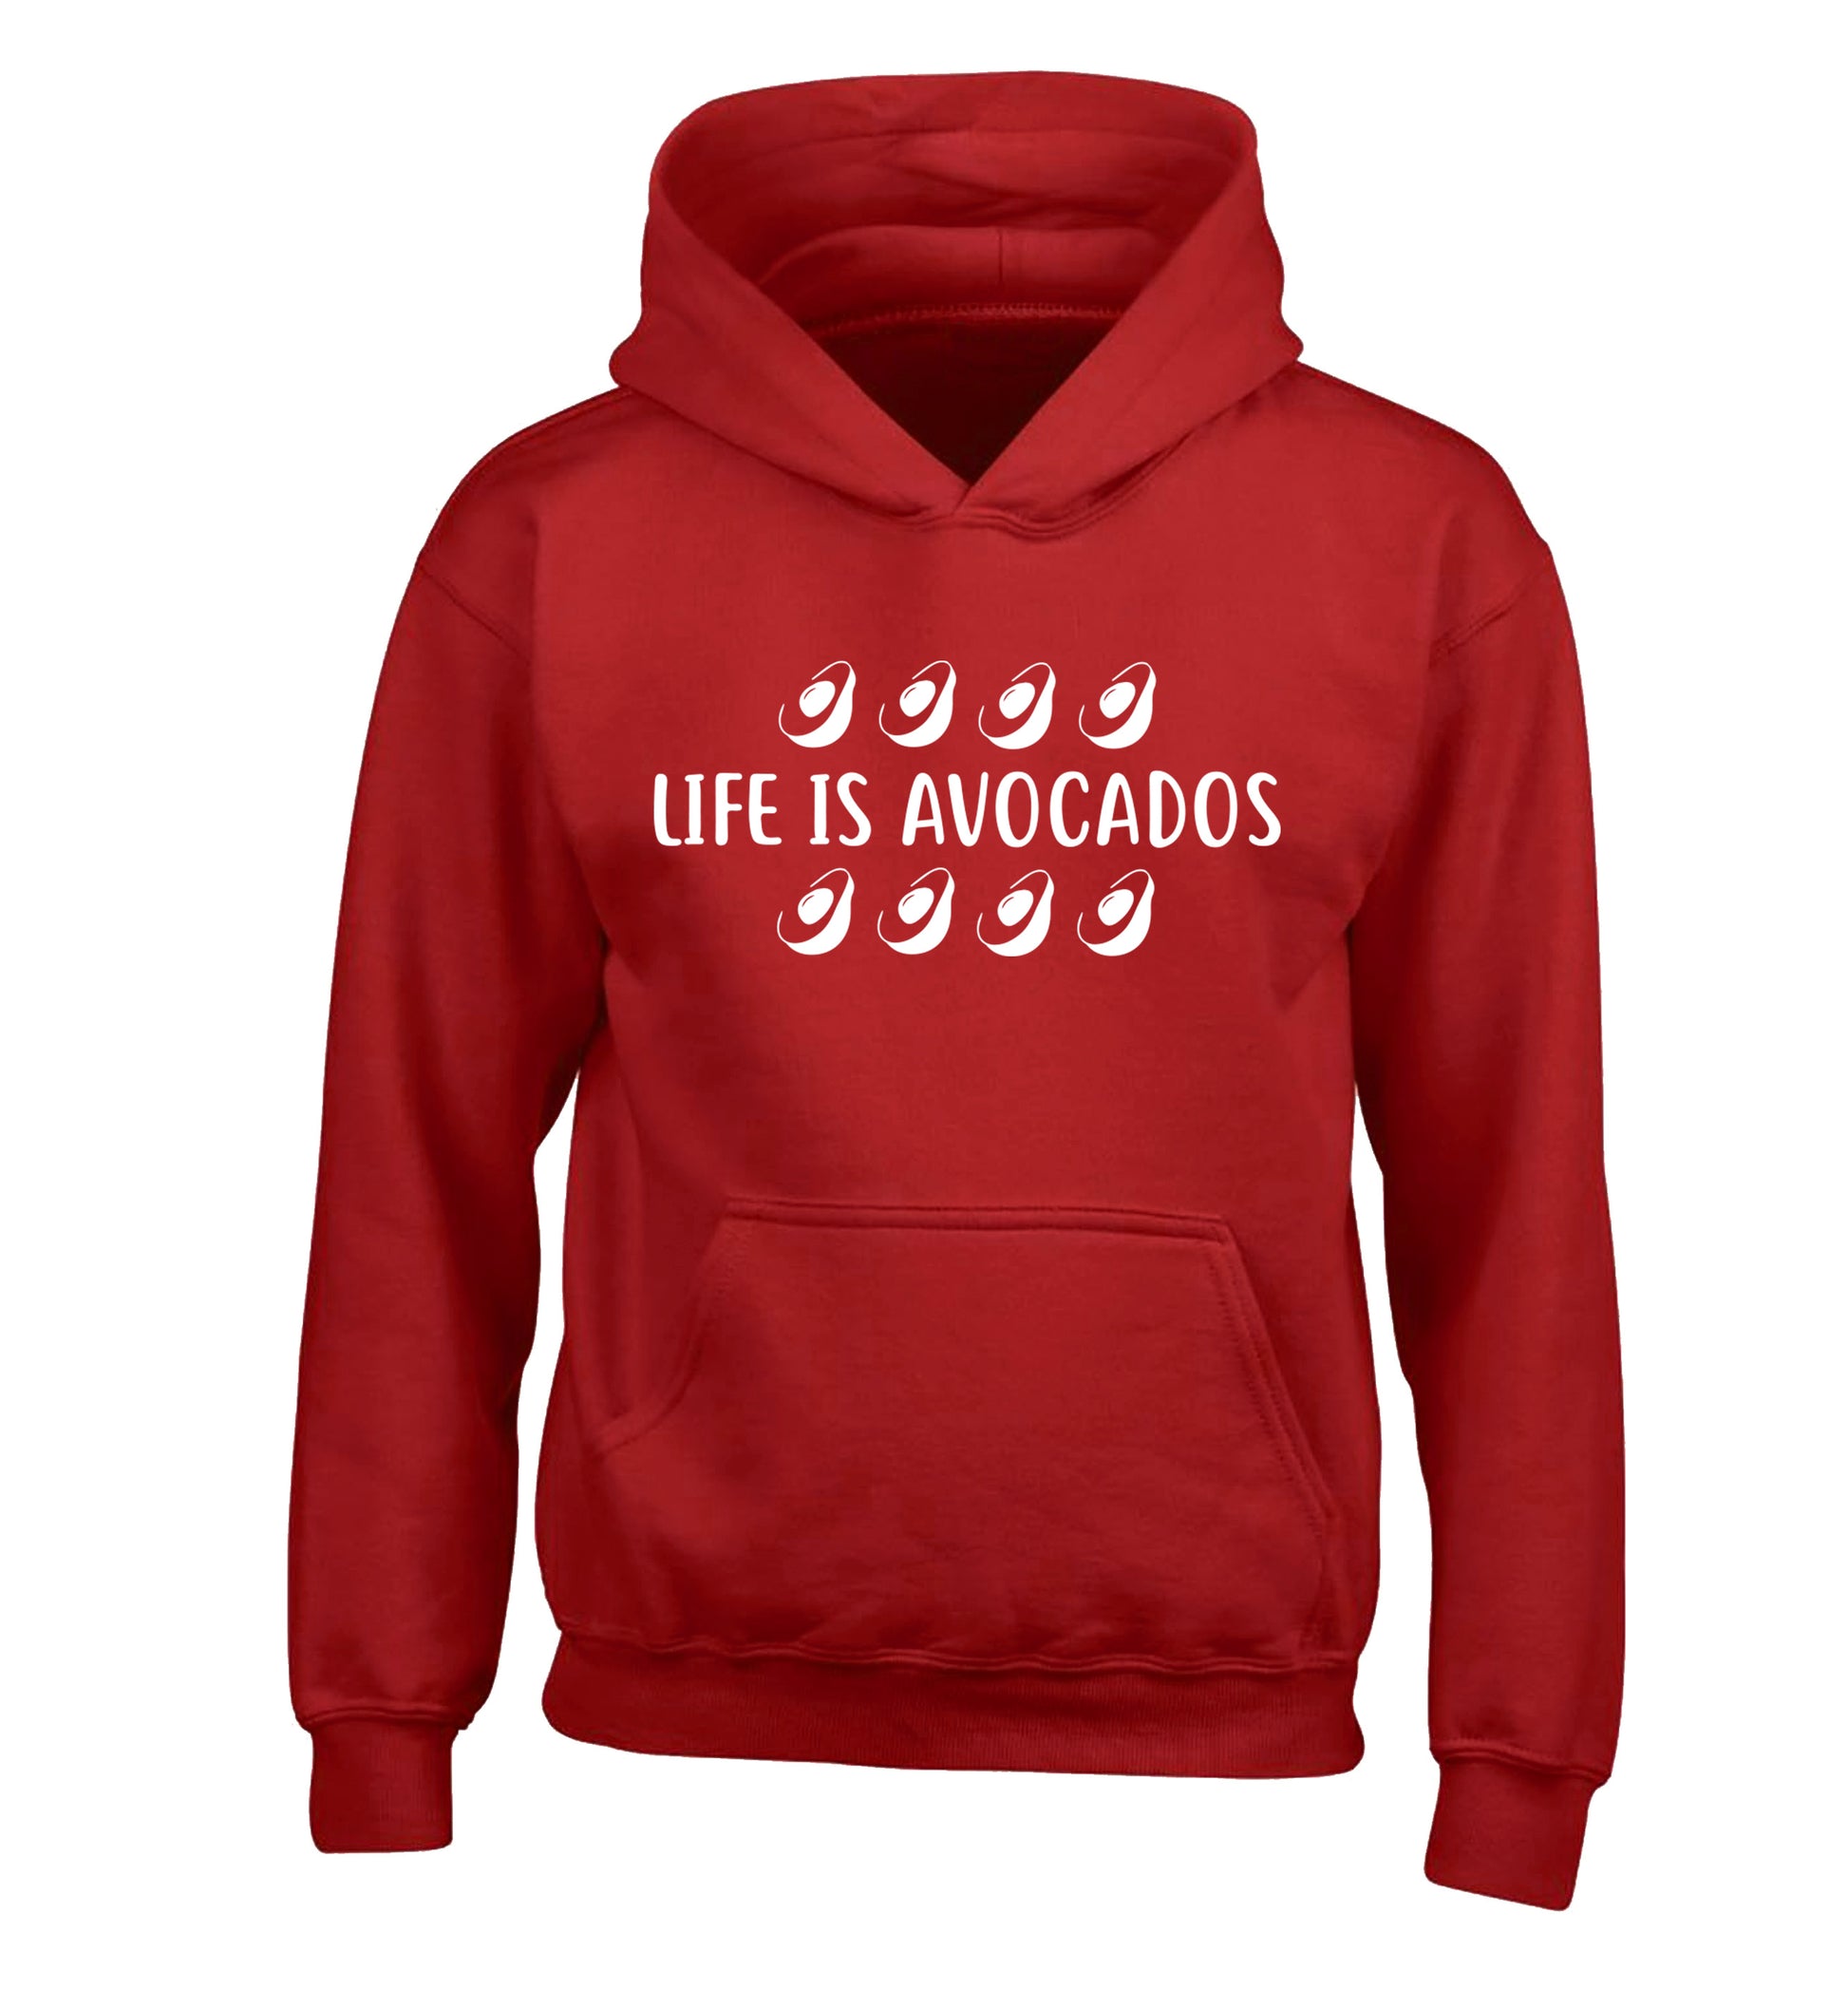 Life is avocados children's red hoodie 12-14 Years